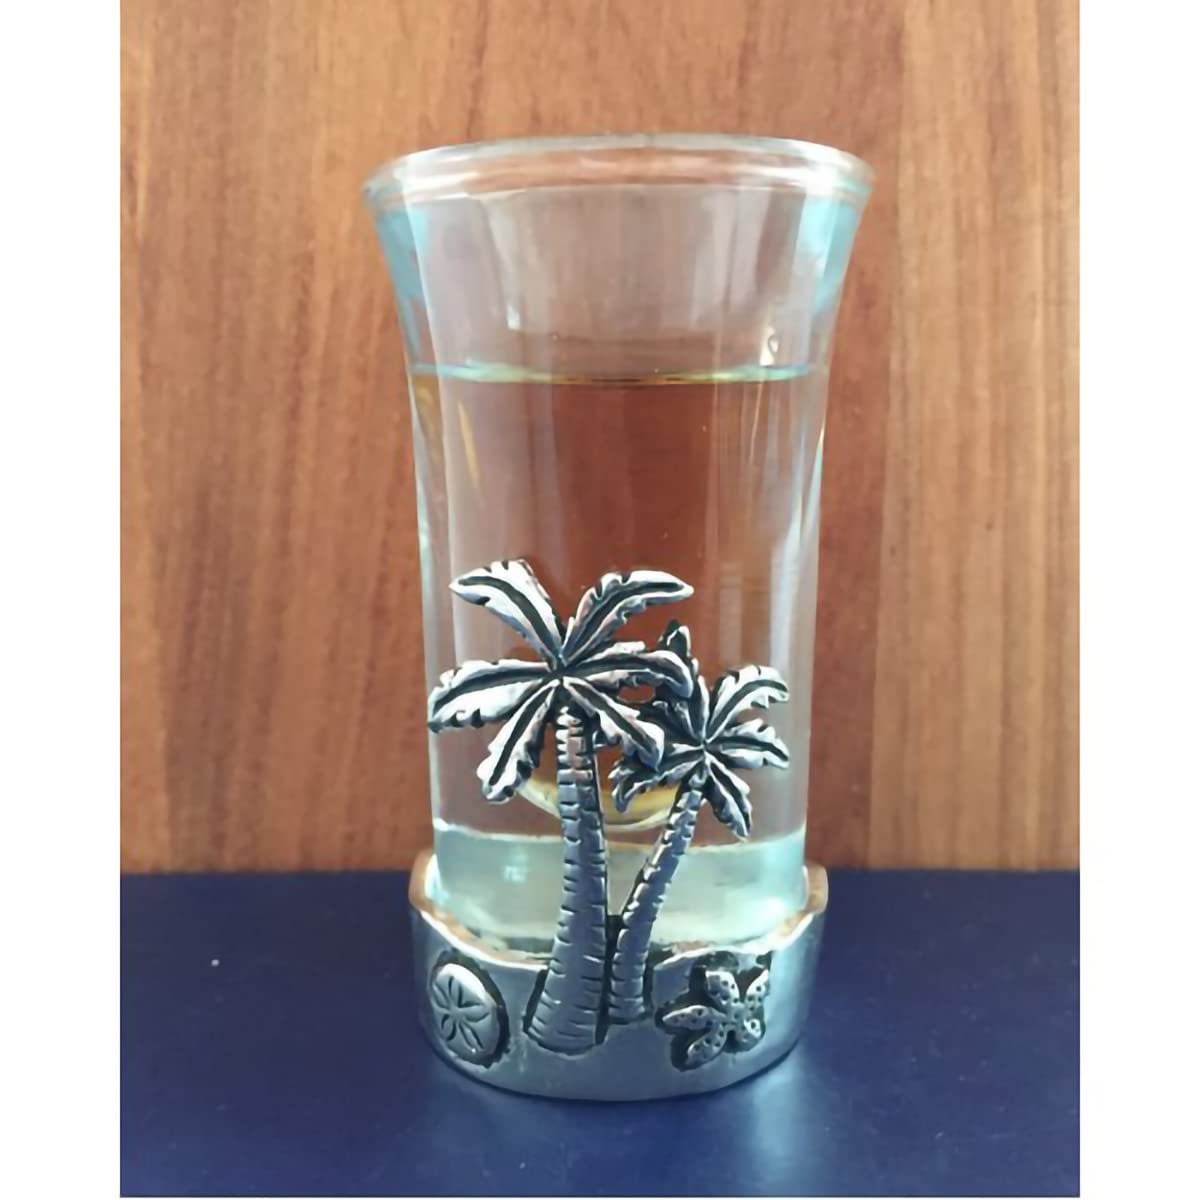 Basic Spirit Shot Glass - Palm Tree Home Decoration for Home Bar, Stocking Stuffer, Party Favor or Gift